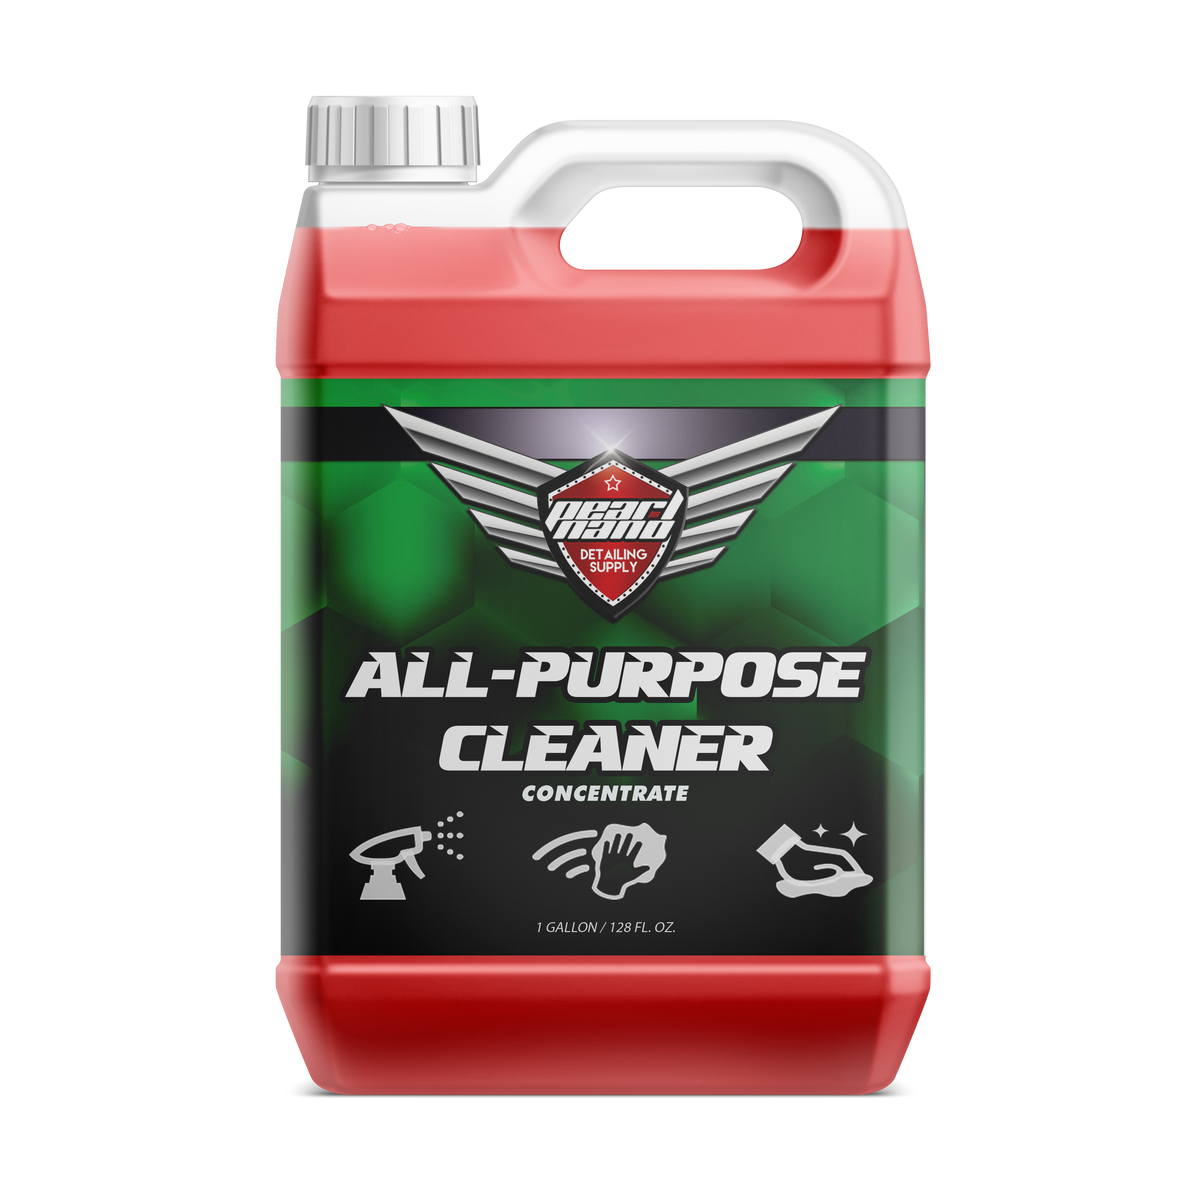 Meguiars All Purpose Cleaner D101 Product Review 